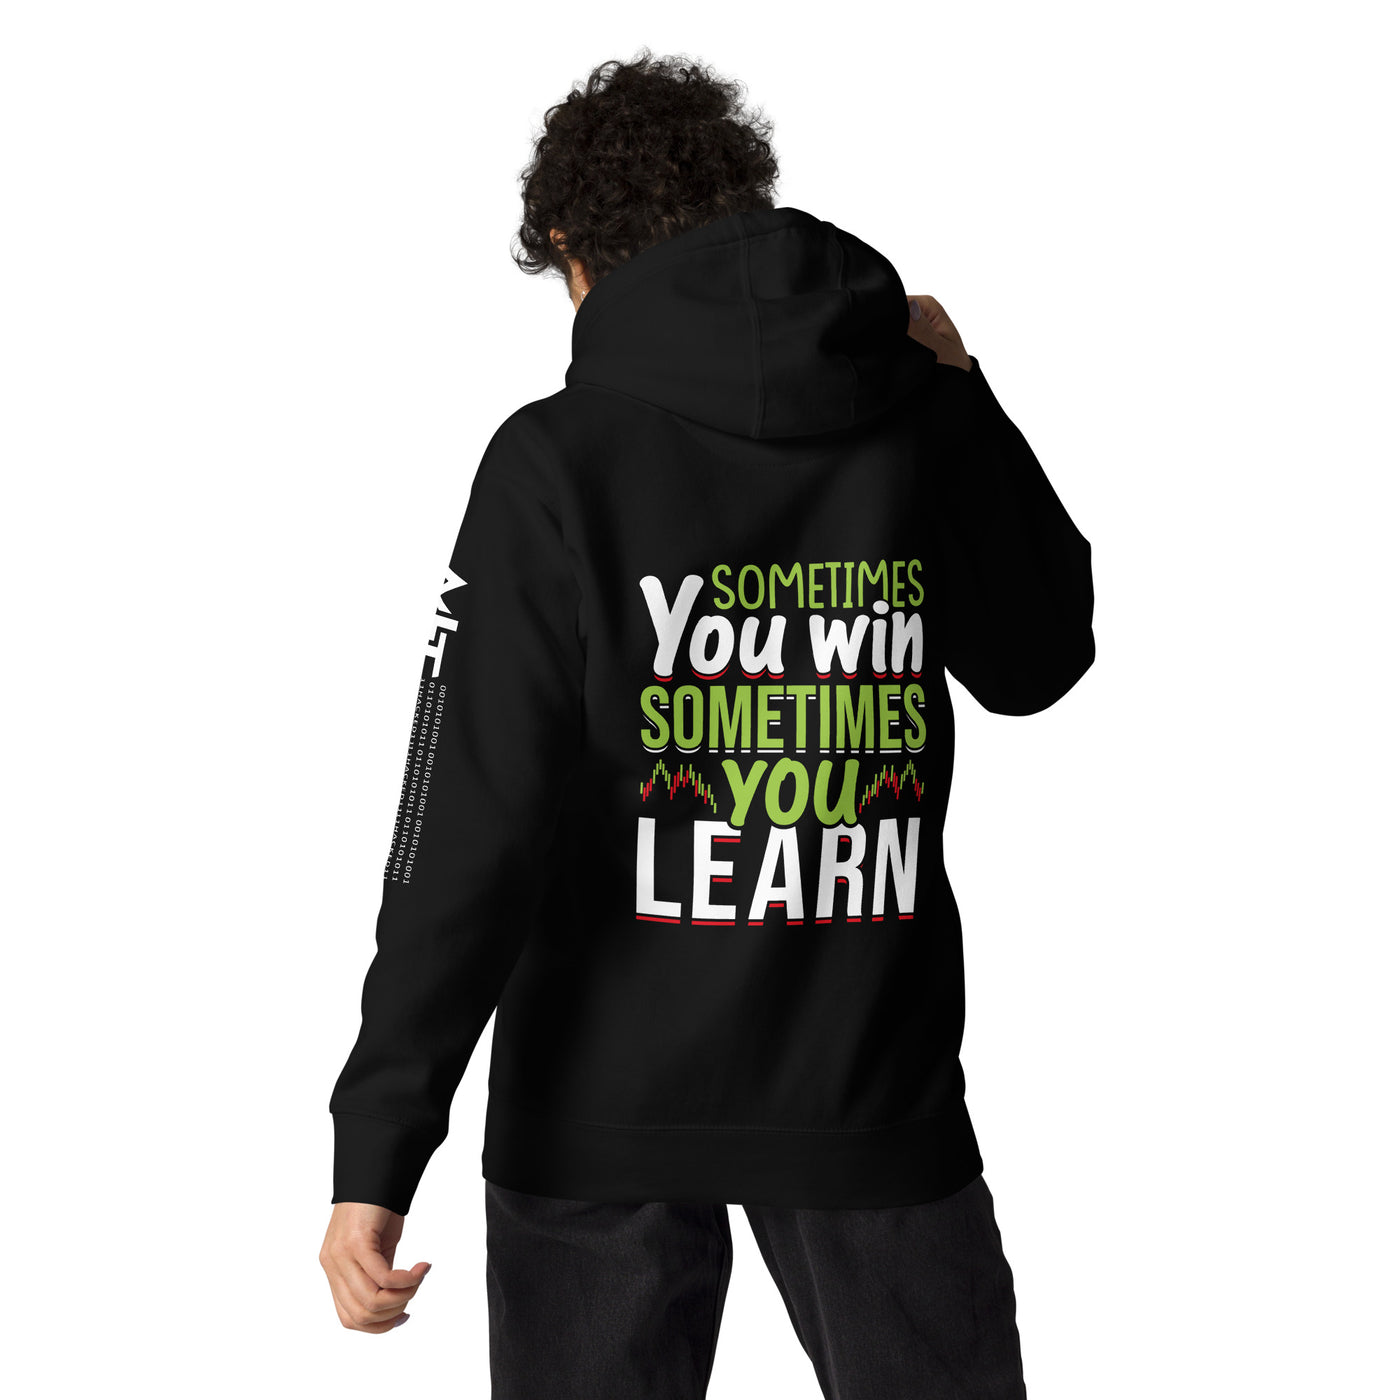 Sometimes you Win, sometimes you Learn - Unisex Hoodie ( Back Print )